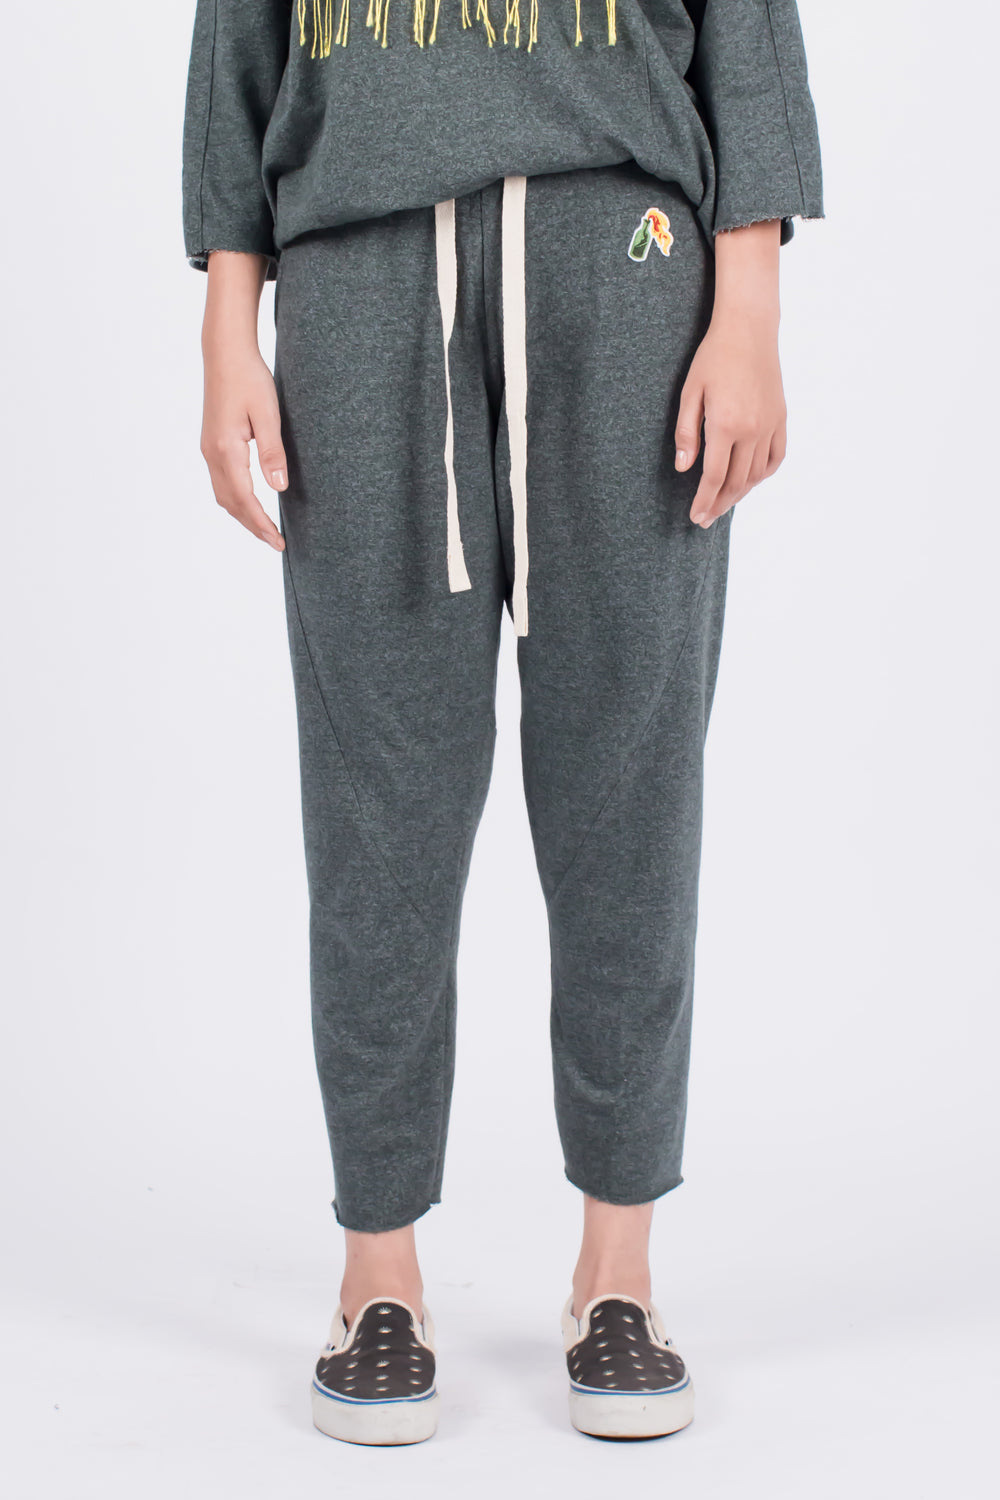 Muzca Eazy Cropped Sweatpants Modest Loose Trousers in Green with Drawstring, Pockets, Small Logo in 100% Cotton